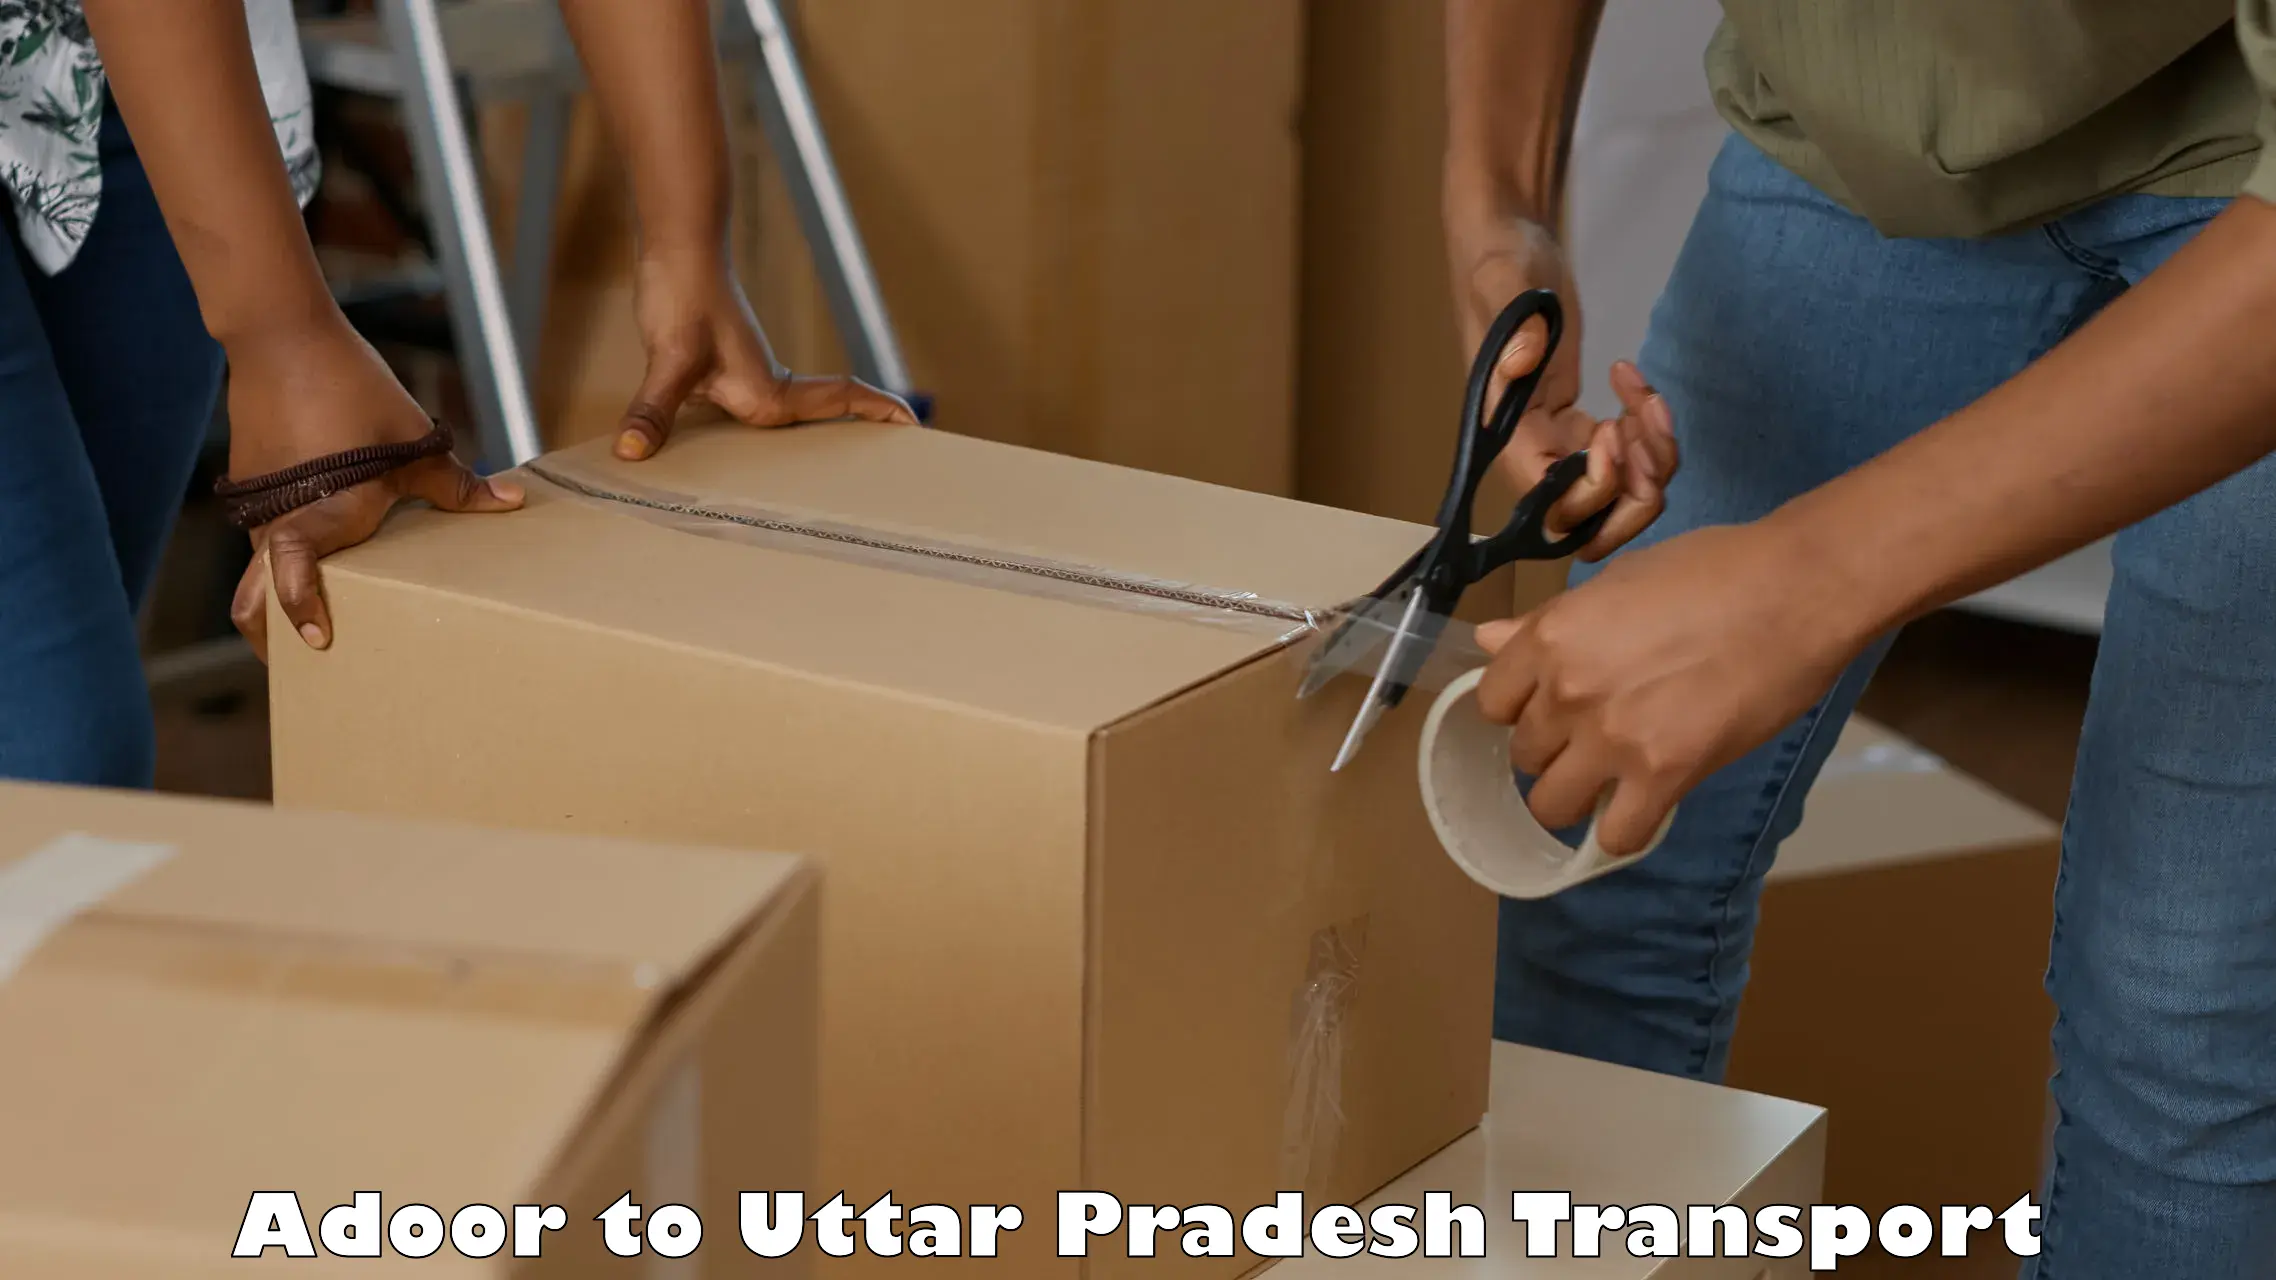 Part load transport service in India Adoor to Lucknow